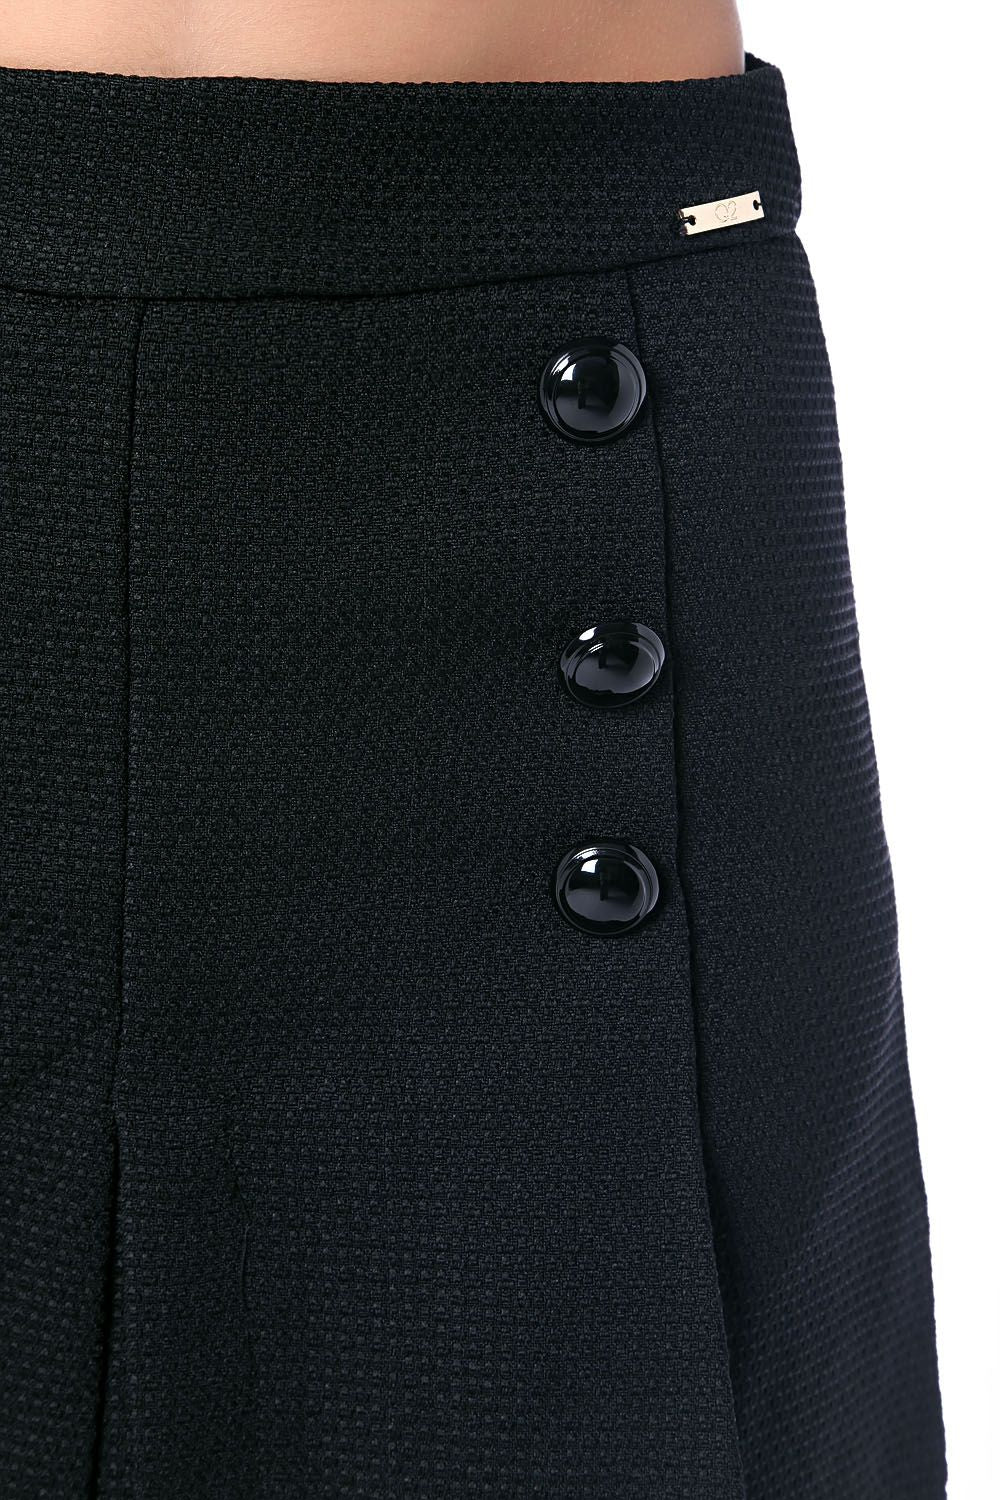 Black skirt with buttons